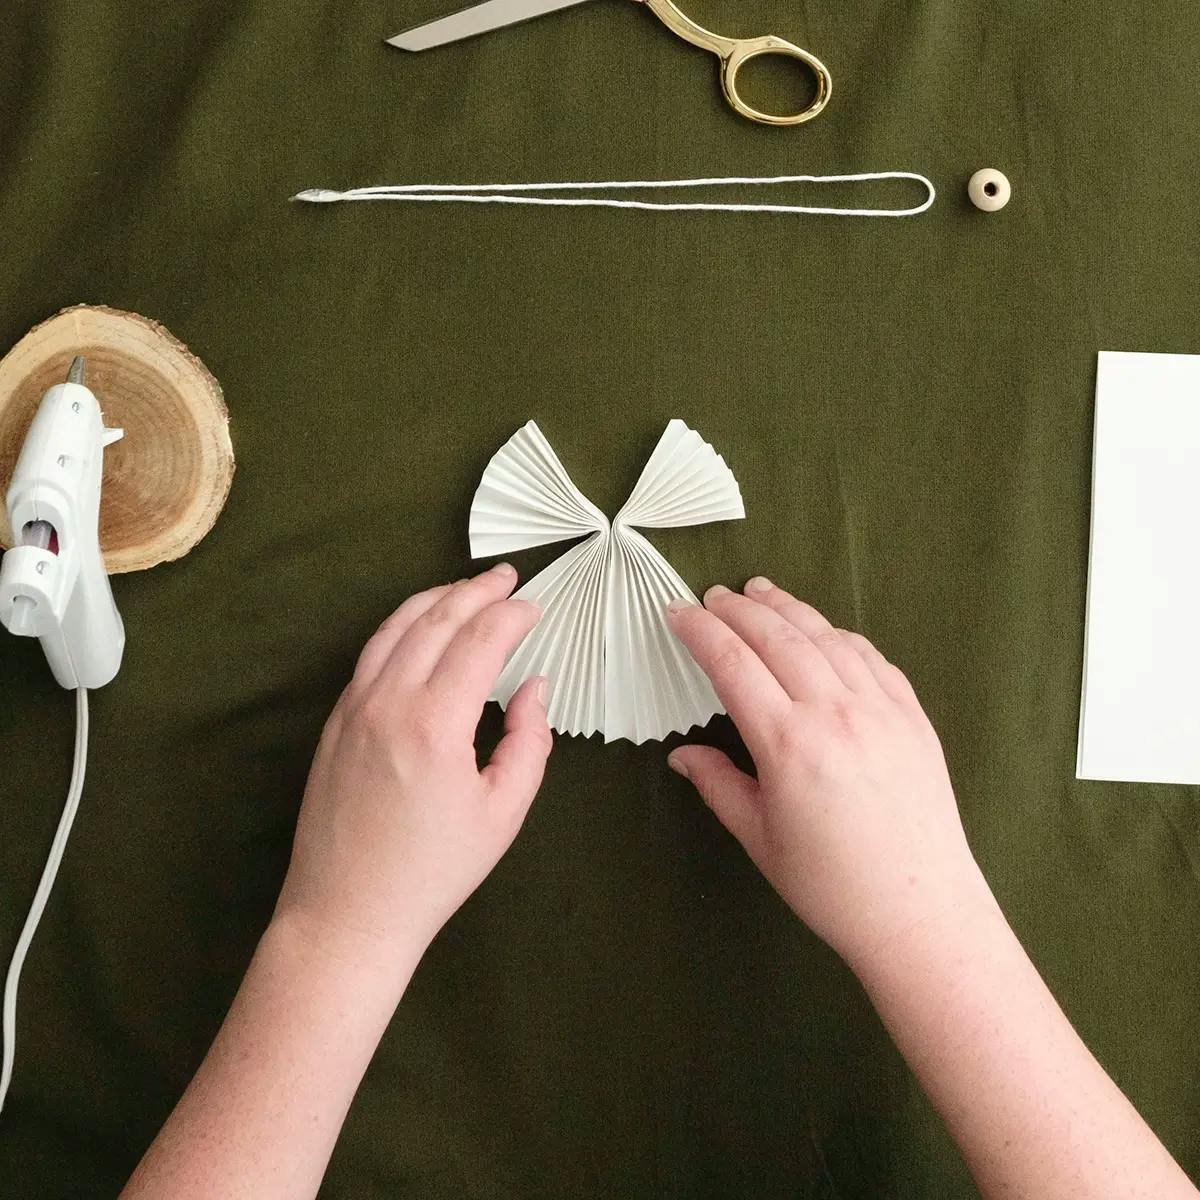 Joining folded paper to form a DIY Christmas angel ornament.